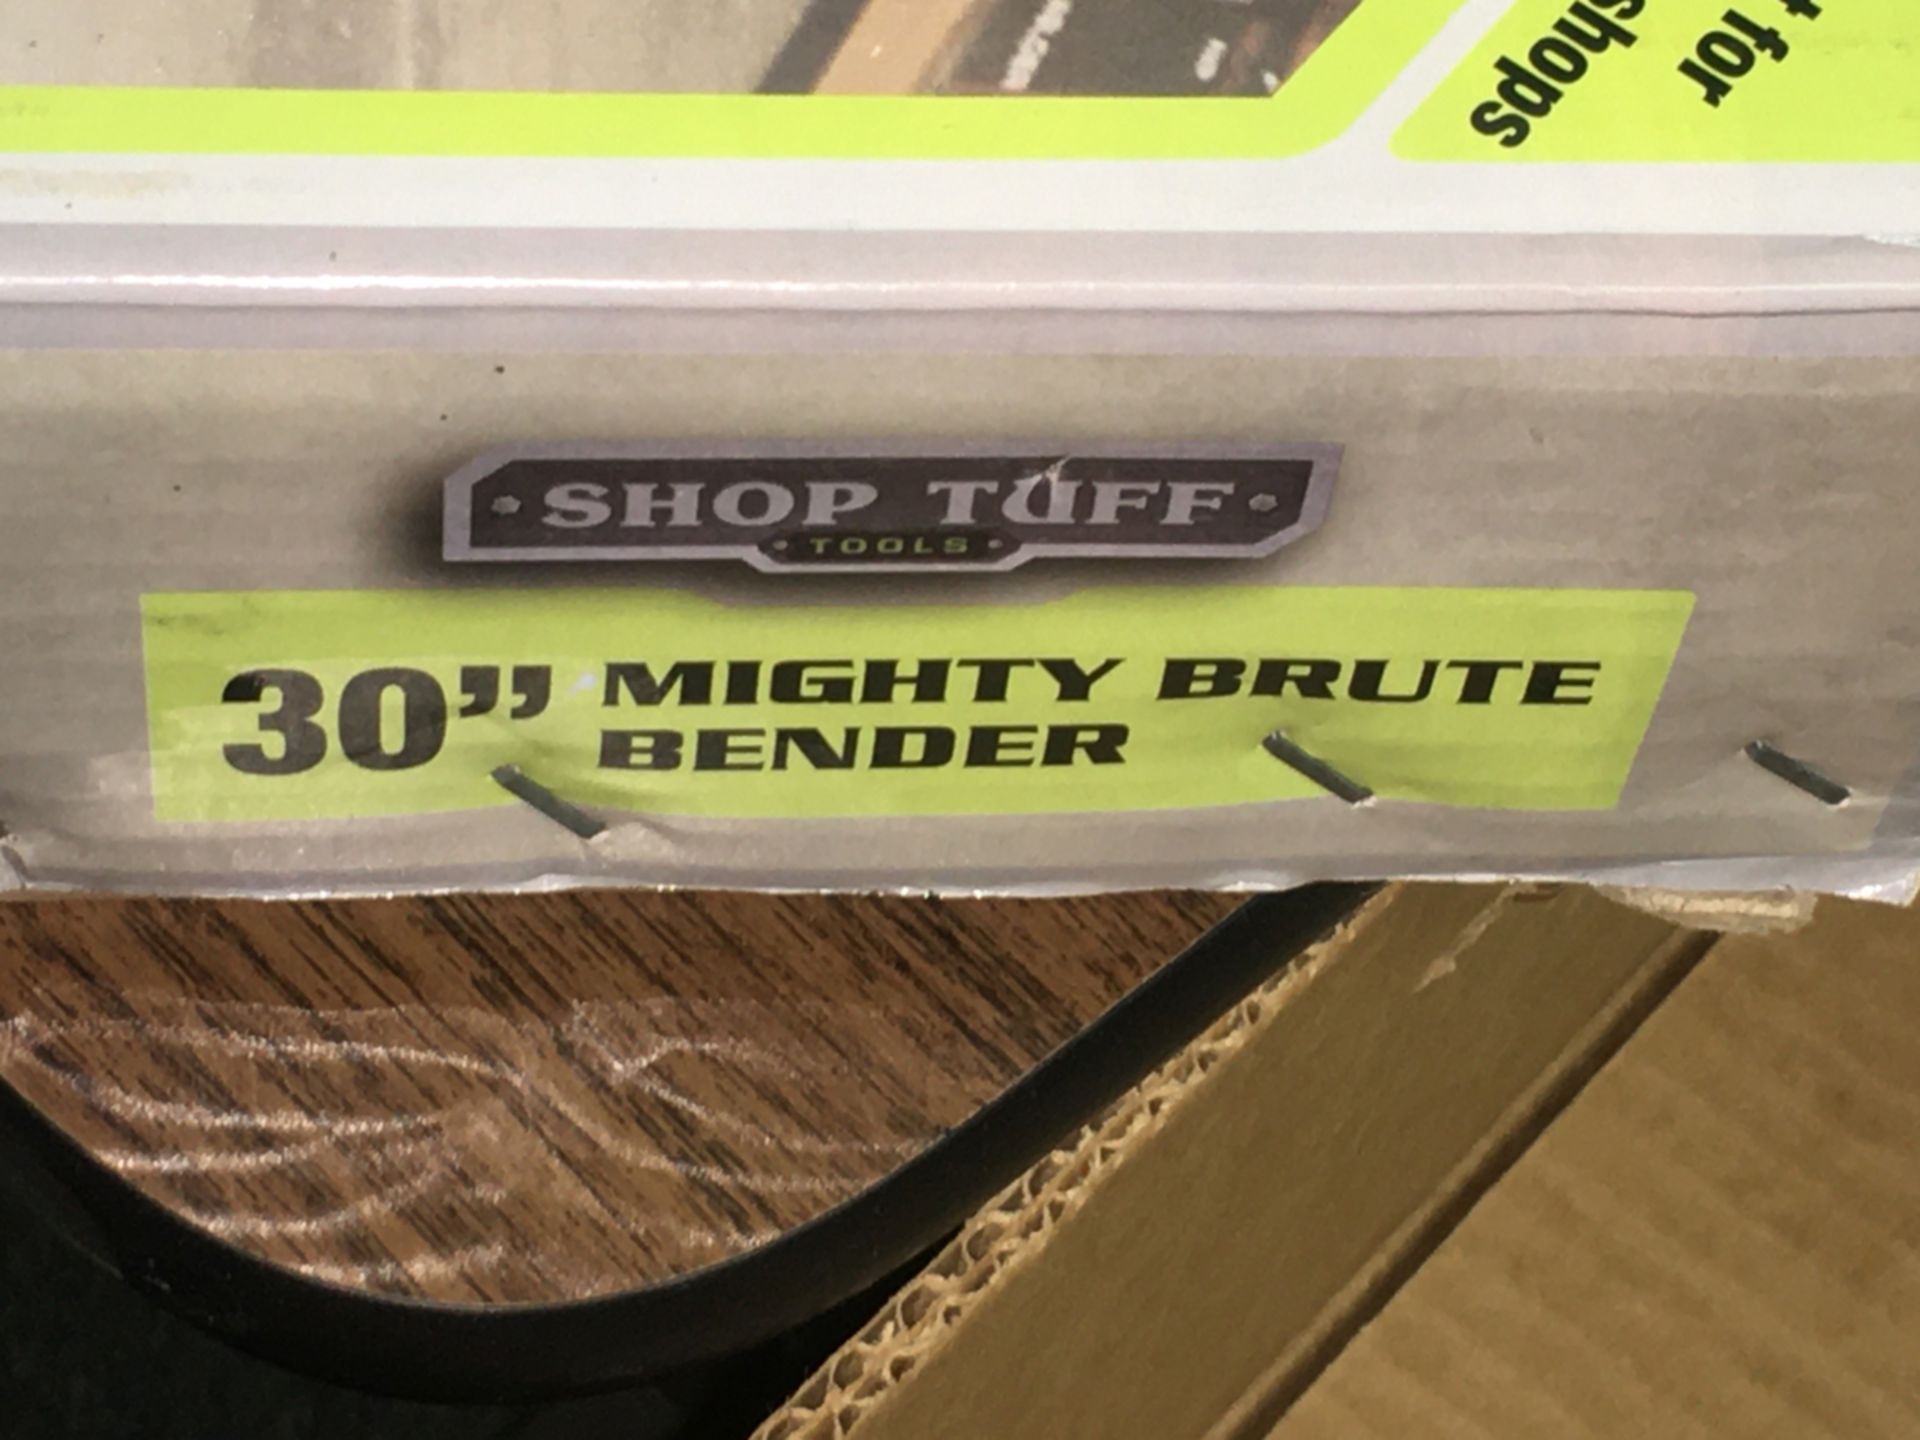 Shop Tuff 30" Mighty Brute Bender - Image 2 of 4